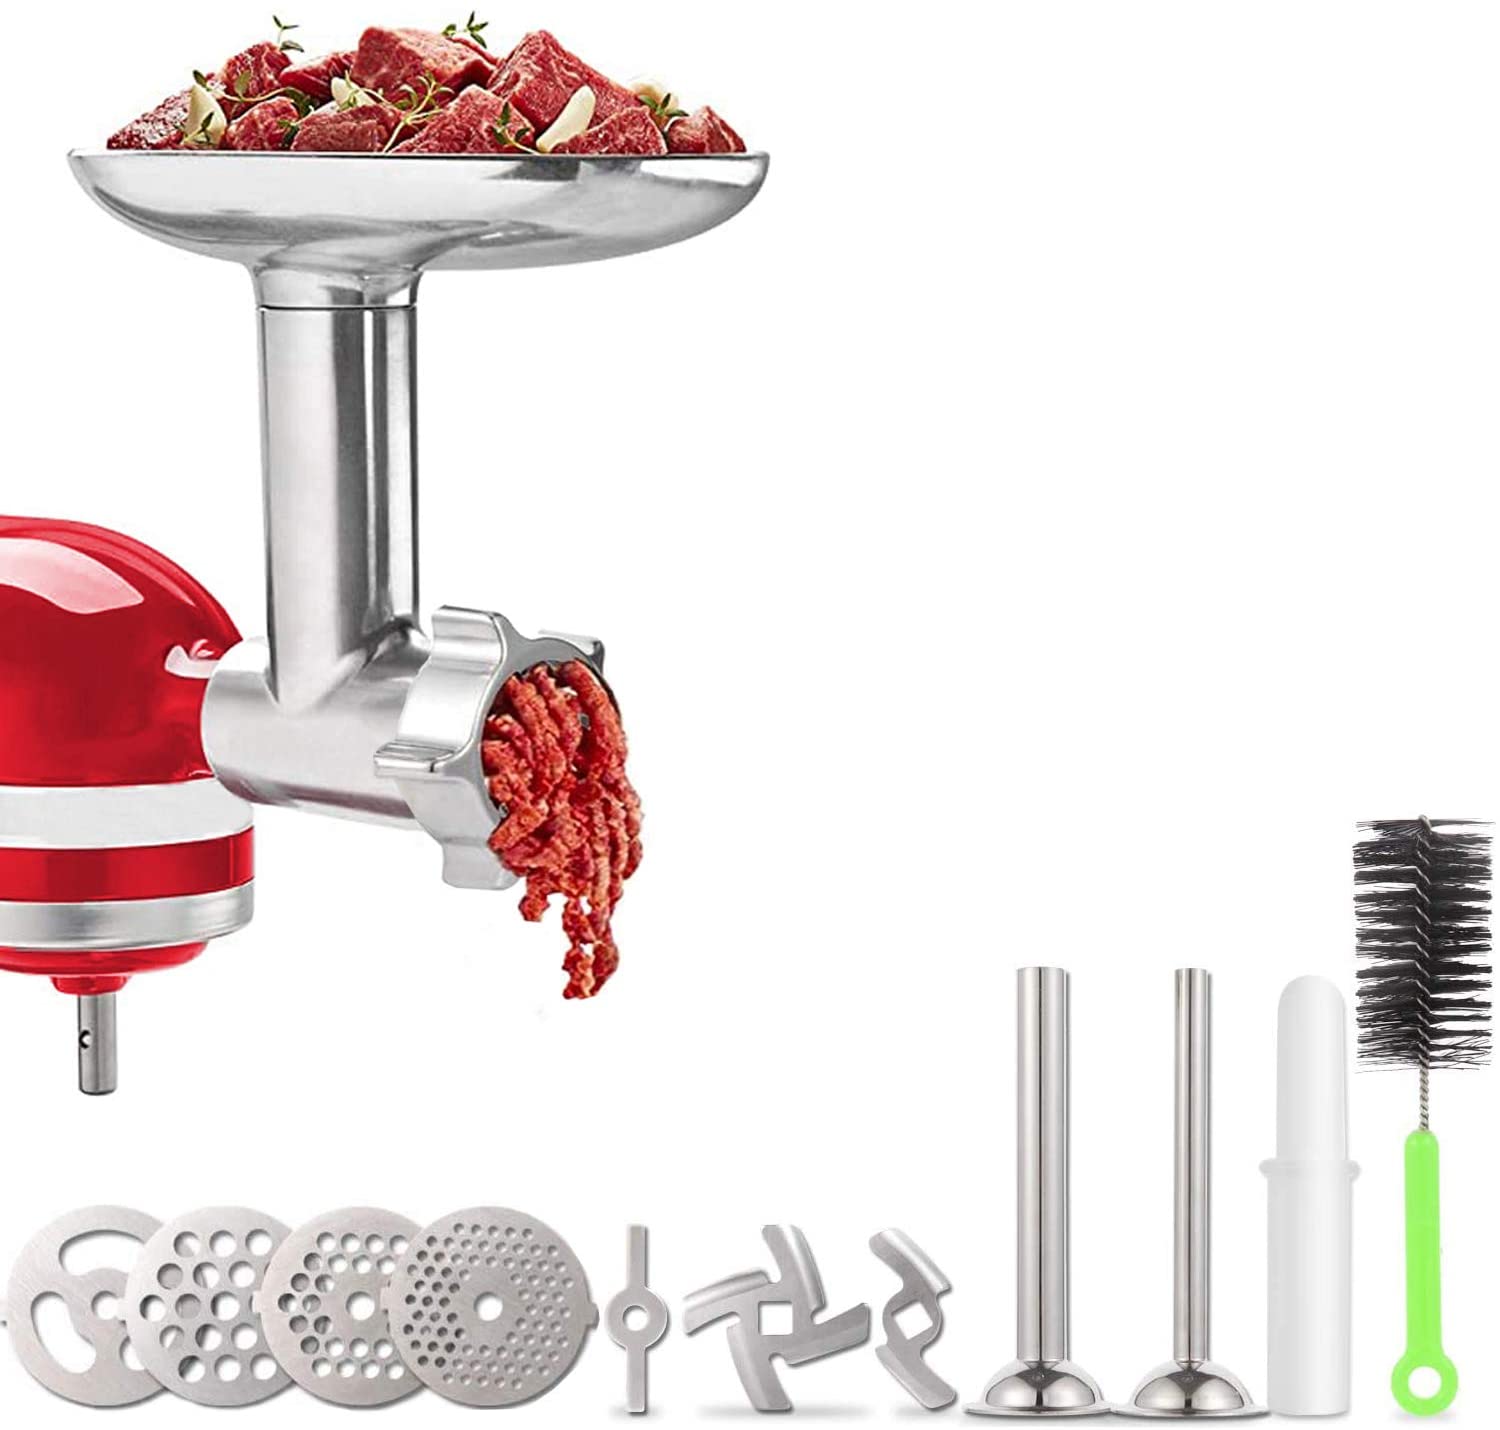 Meat Grinder Attachment for KitchenAid Stand Mixers, Accessories Included 2 Sausage Stuffer Tubes, Durable Metal Food Grinder Attachments by Kitchood, Silver - image 1 of 7